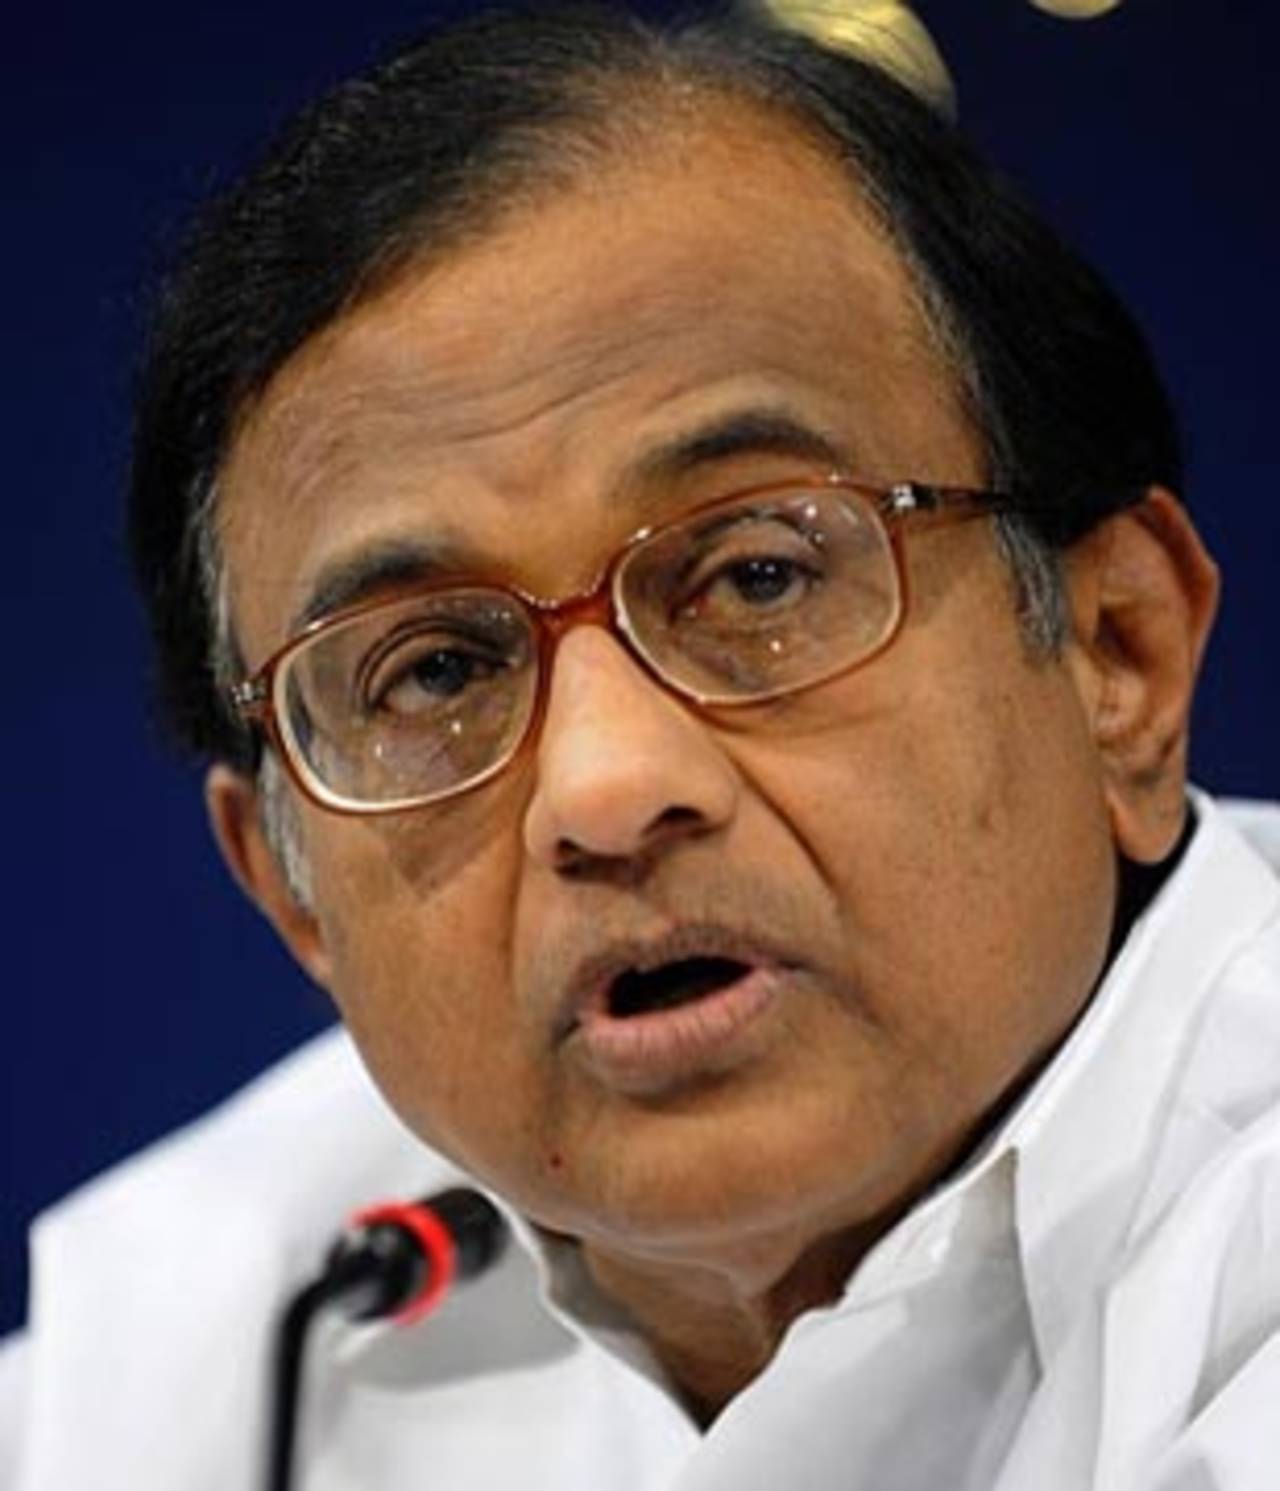 P Chidambaram: "There was no hint or nudge from the government "&nbsp;&nbsp;&bull;&nbsp;&nbsp;AFP